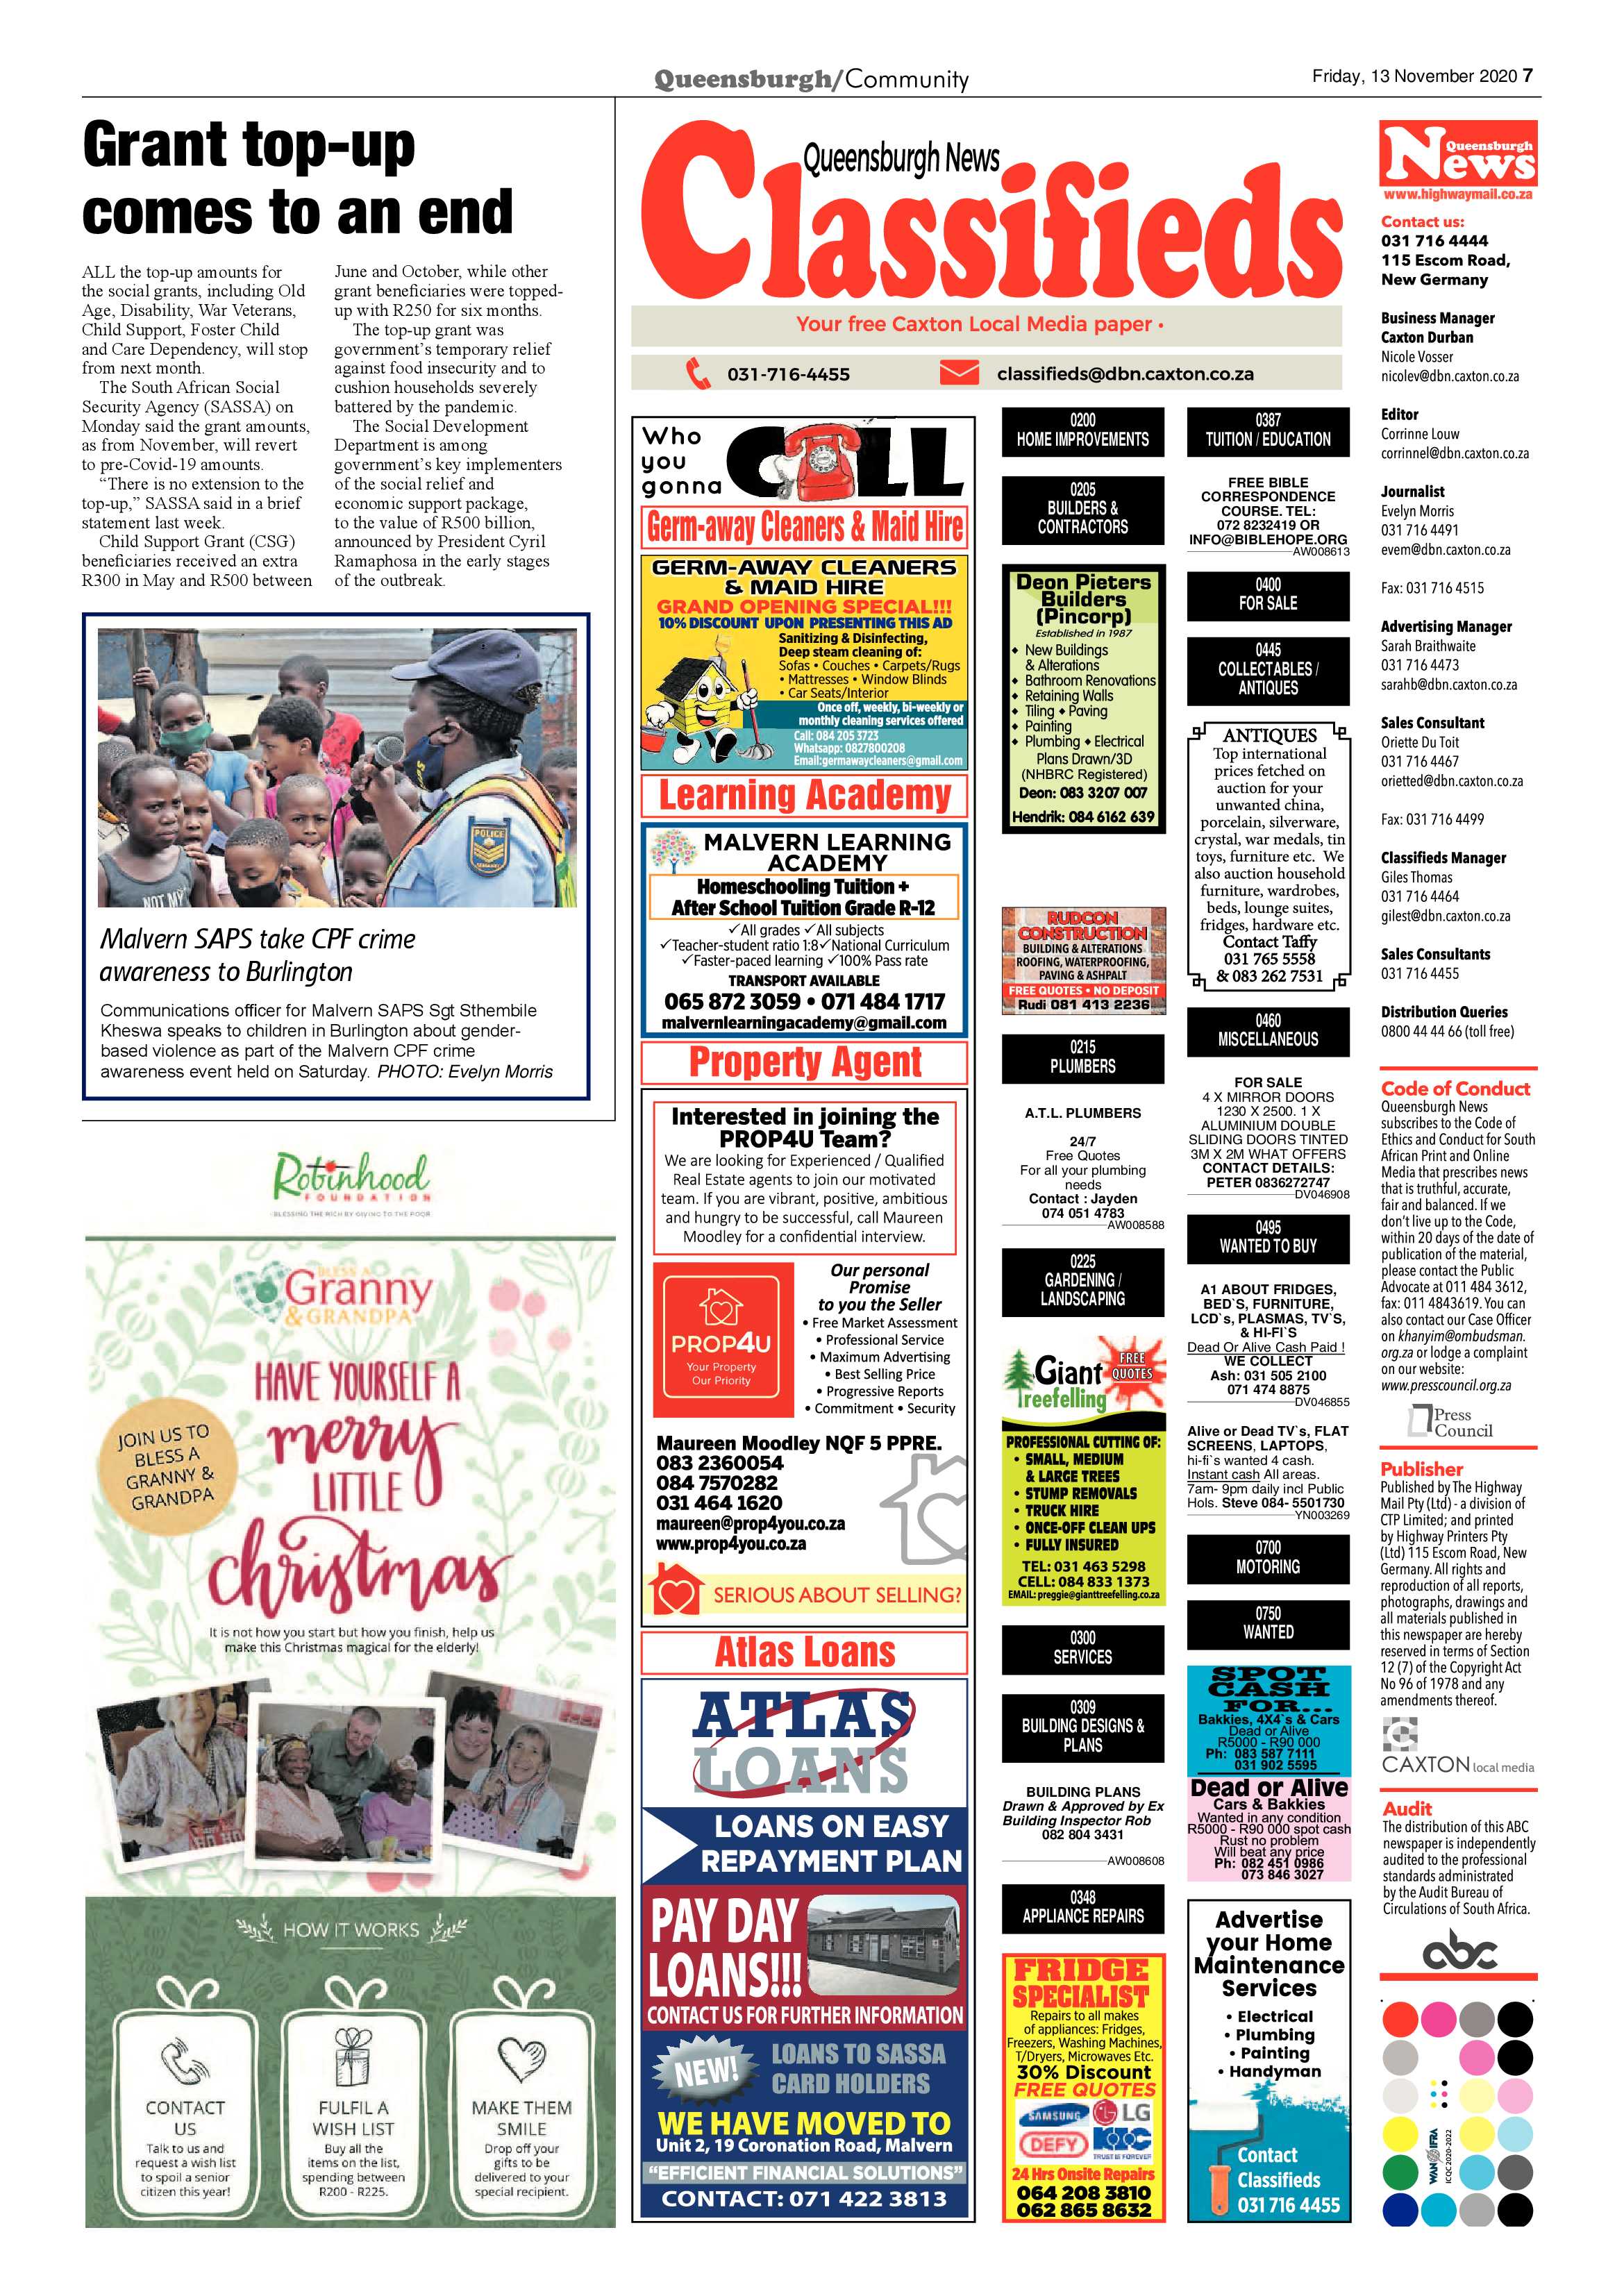 Queensburgh News 13 November 2020 page 7